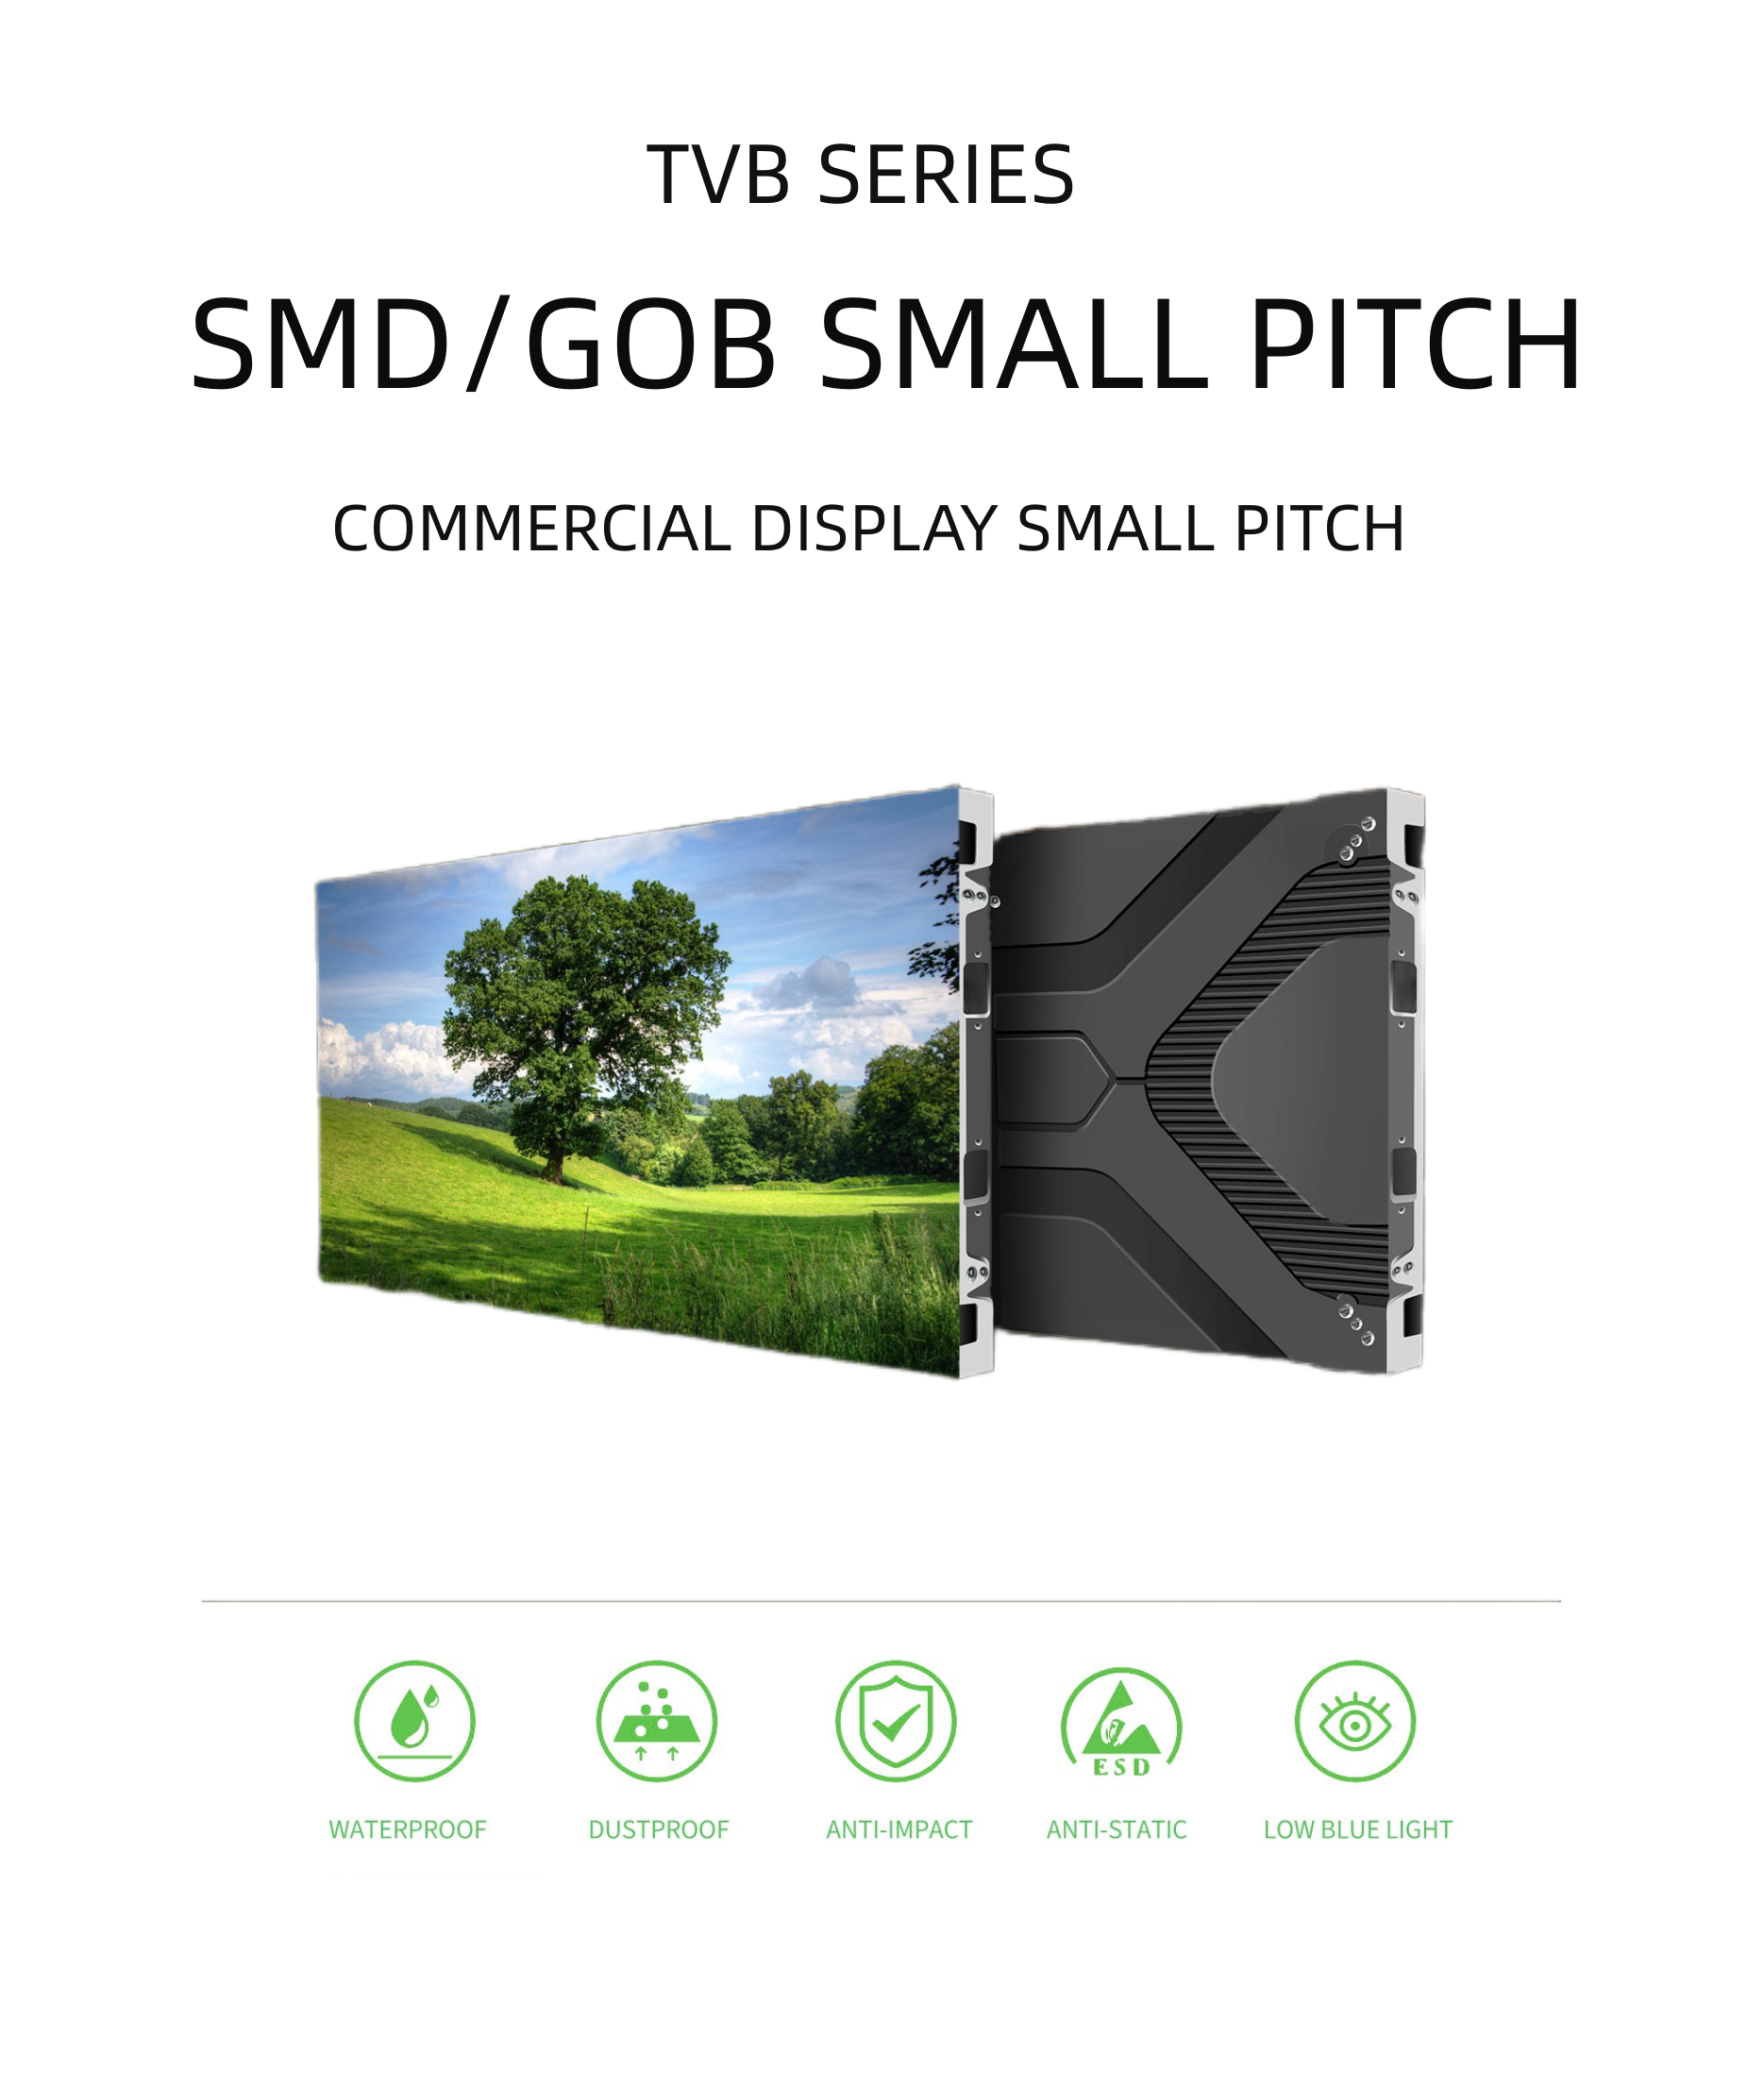 Small pitch display